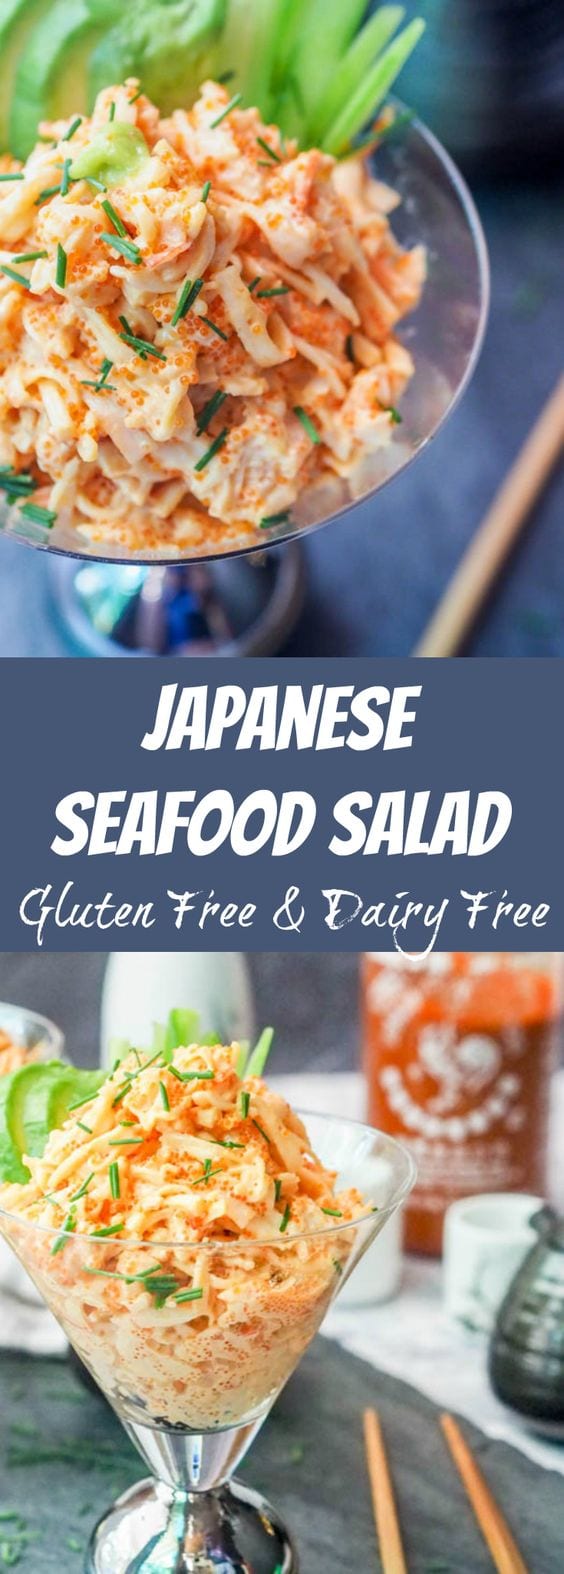 Seafood Salad with Asian Flavors with Crab and Shrimp